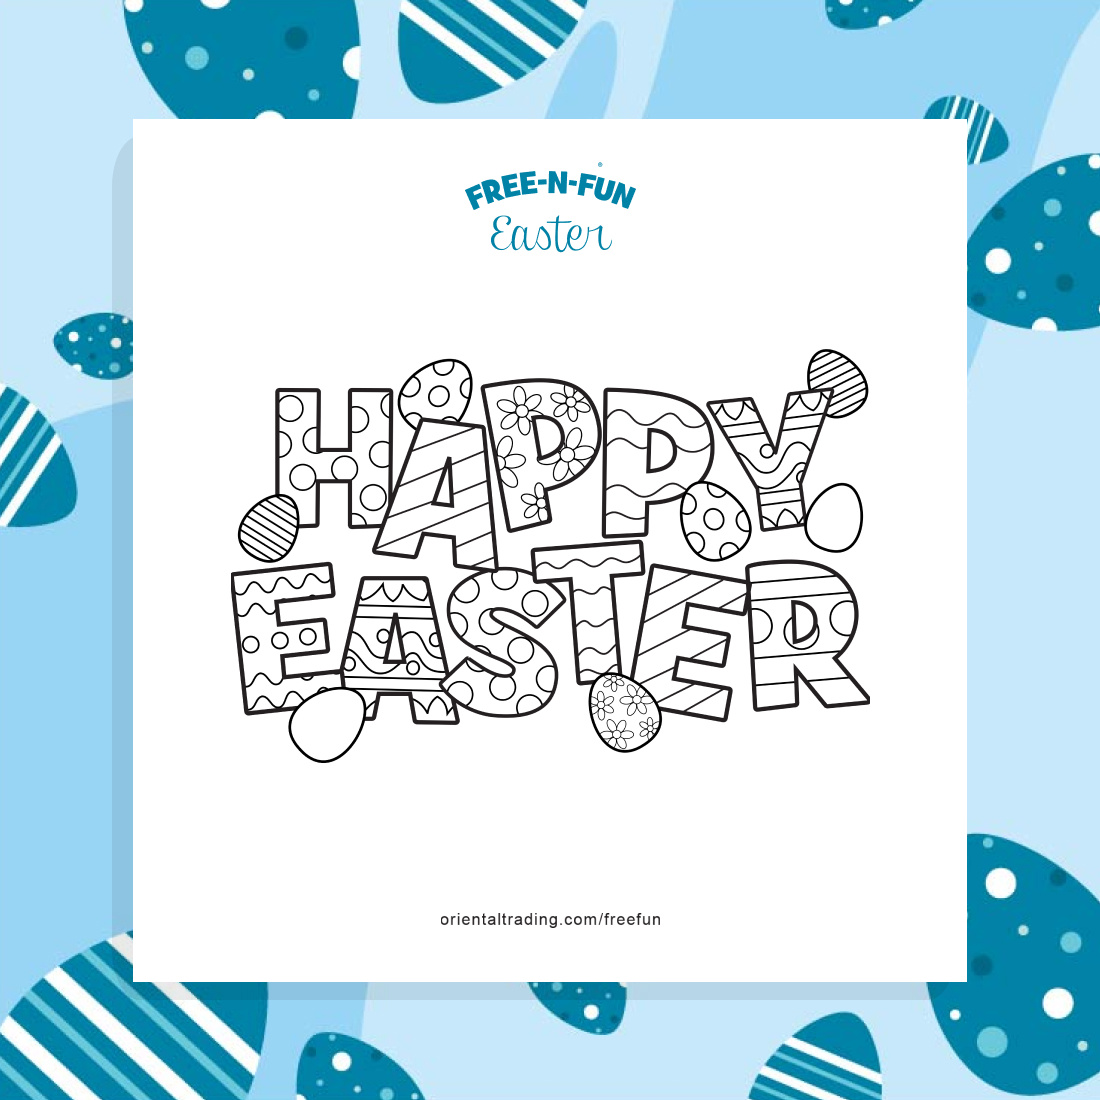 Happy Easter Eggs free easter printables previews.